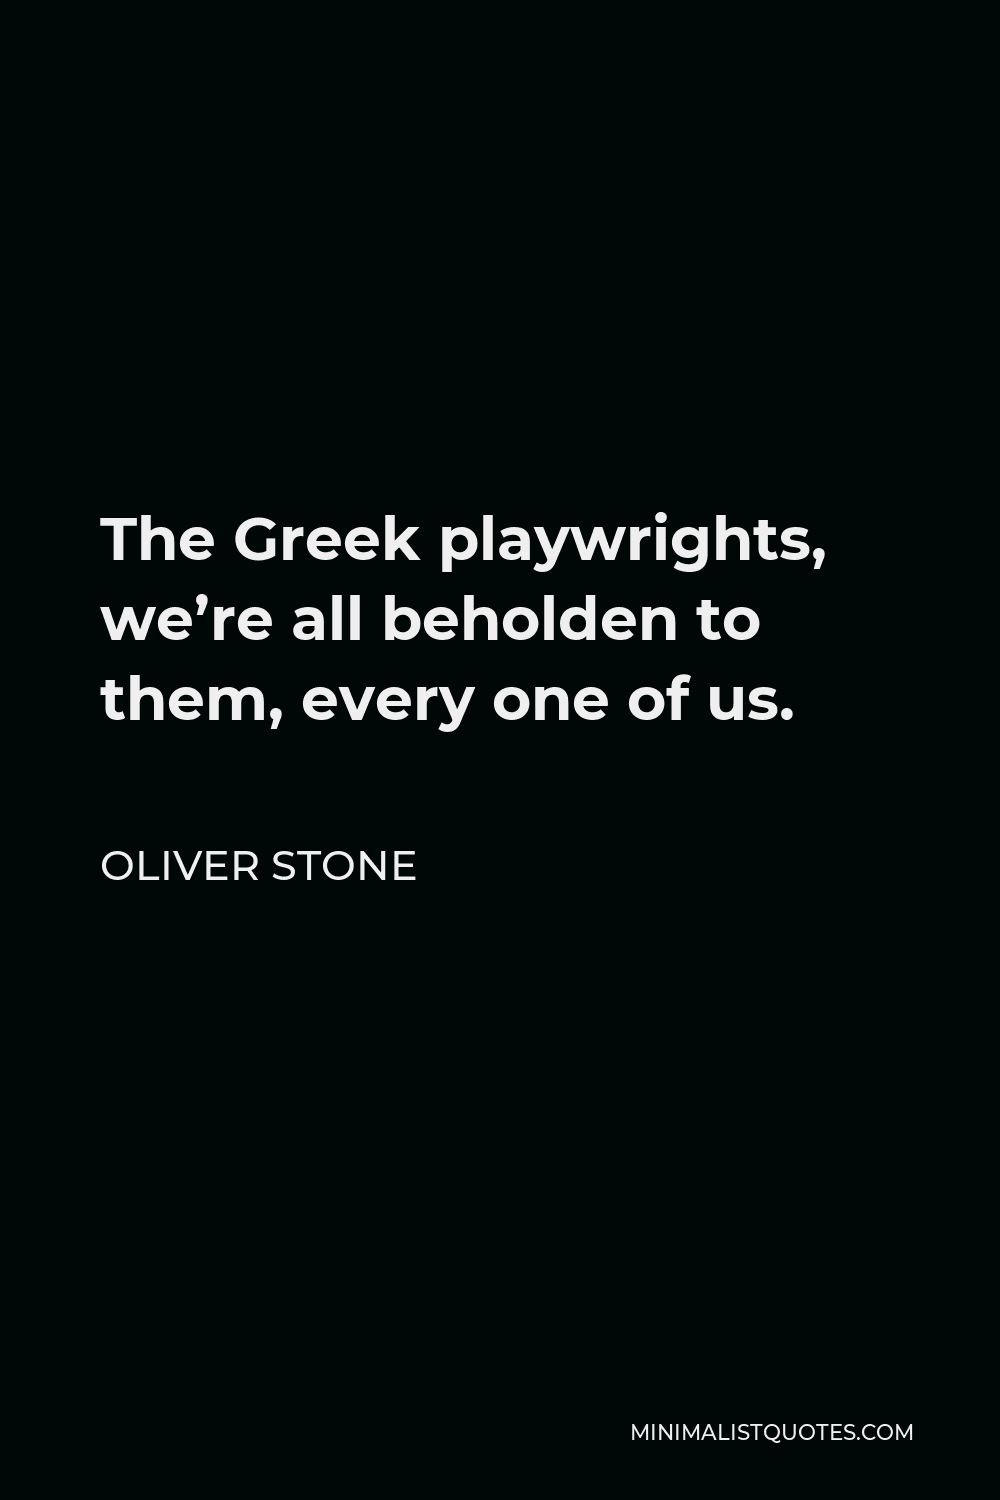 Oliver Stone Quote - The Greek playwrights, we’re all beholden to them, every one of us.